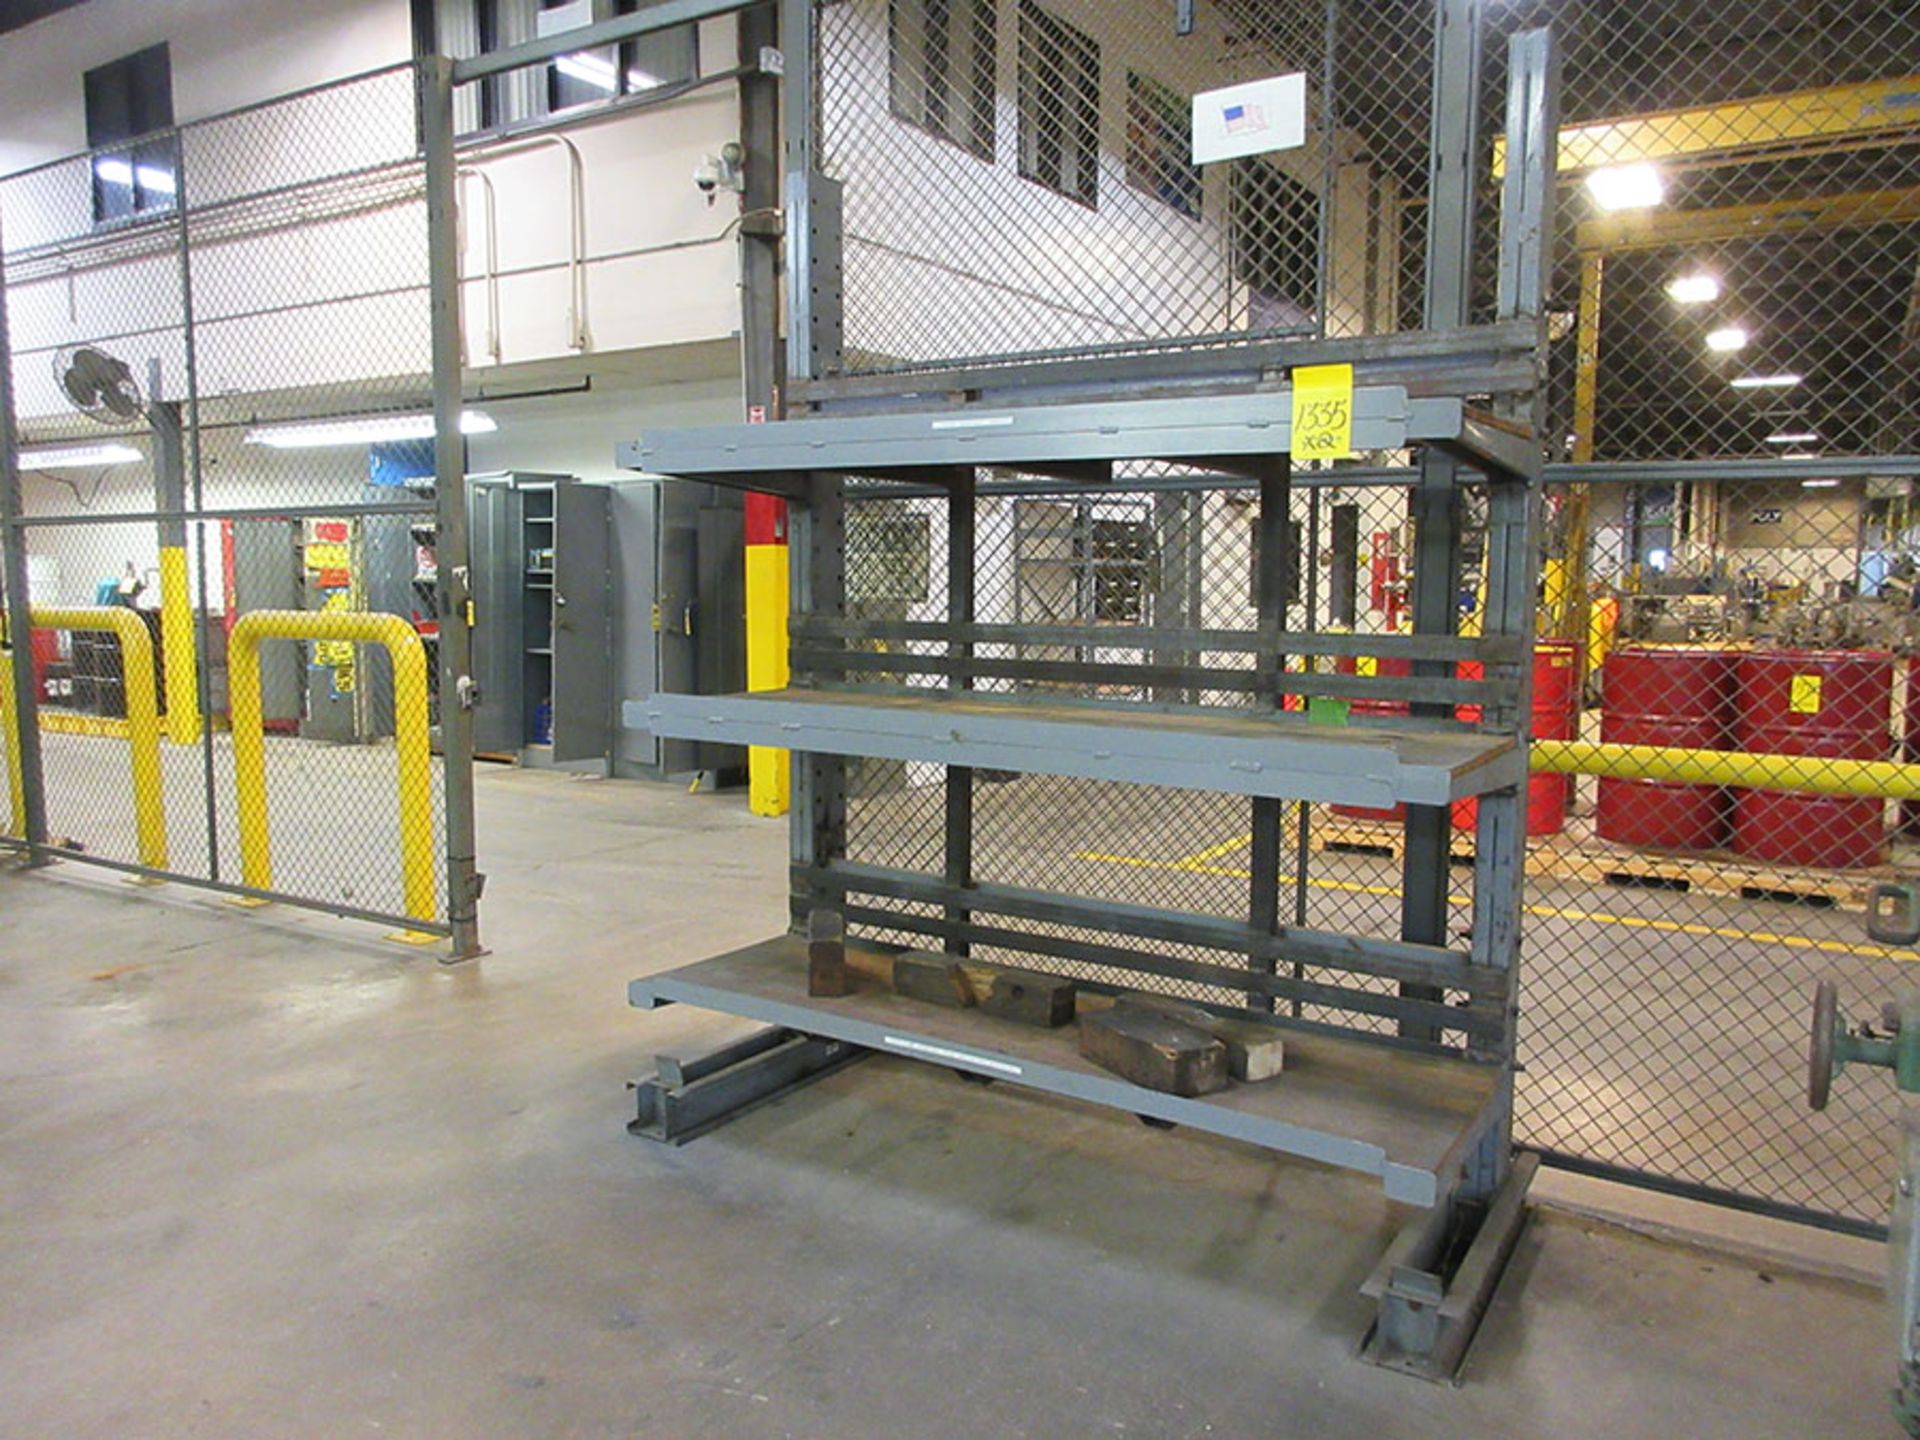 (2) CANTILEVER RACKS WITH CONTENTS